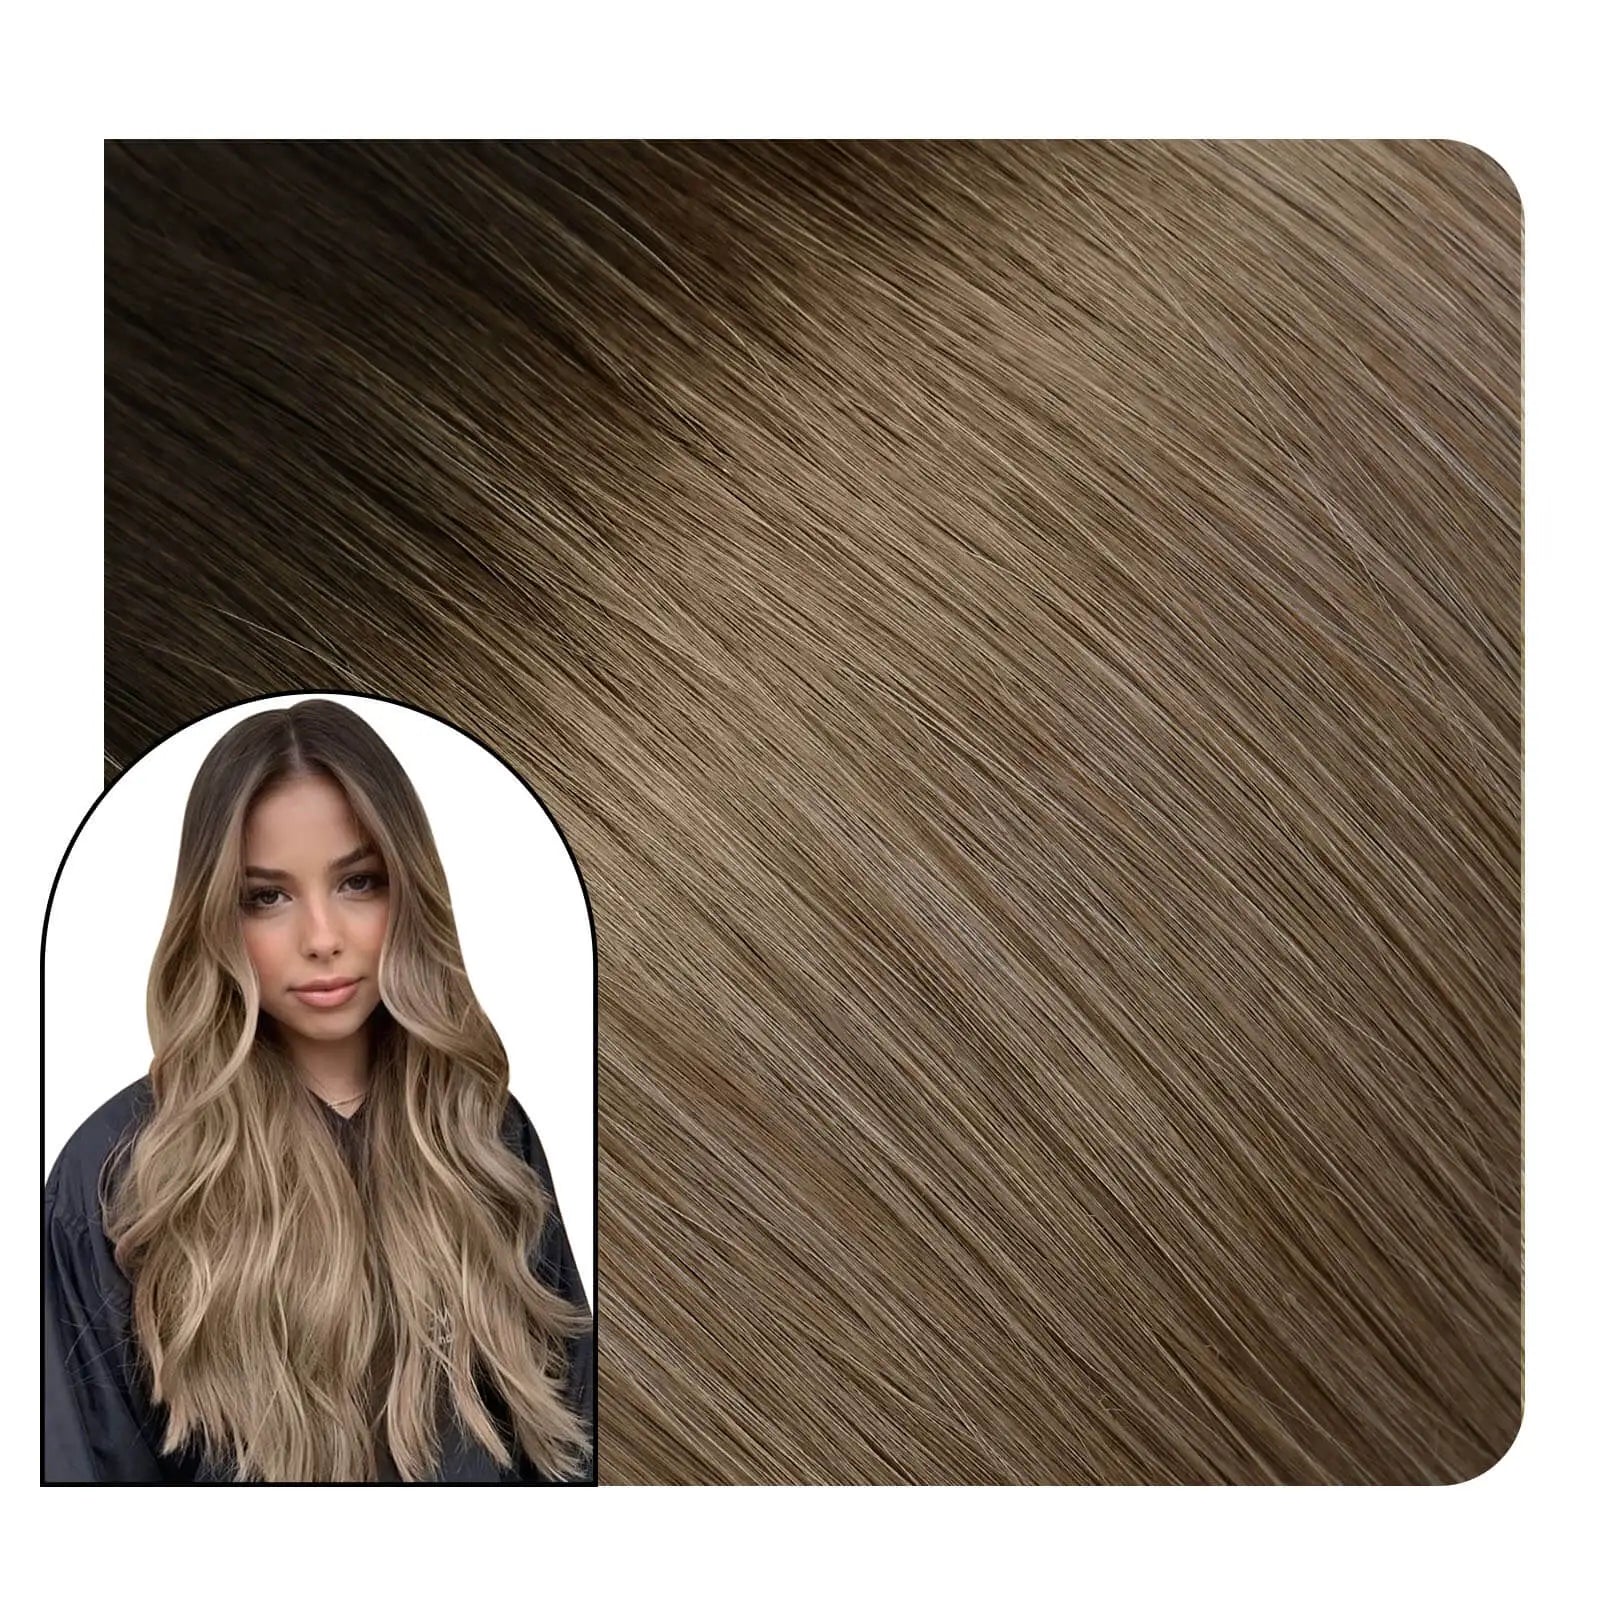 Virgin Injected Tape in Hair Extensions Real Human Hair Balayage Color R2/DXB/18